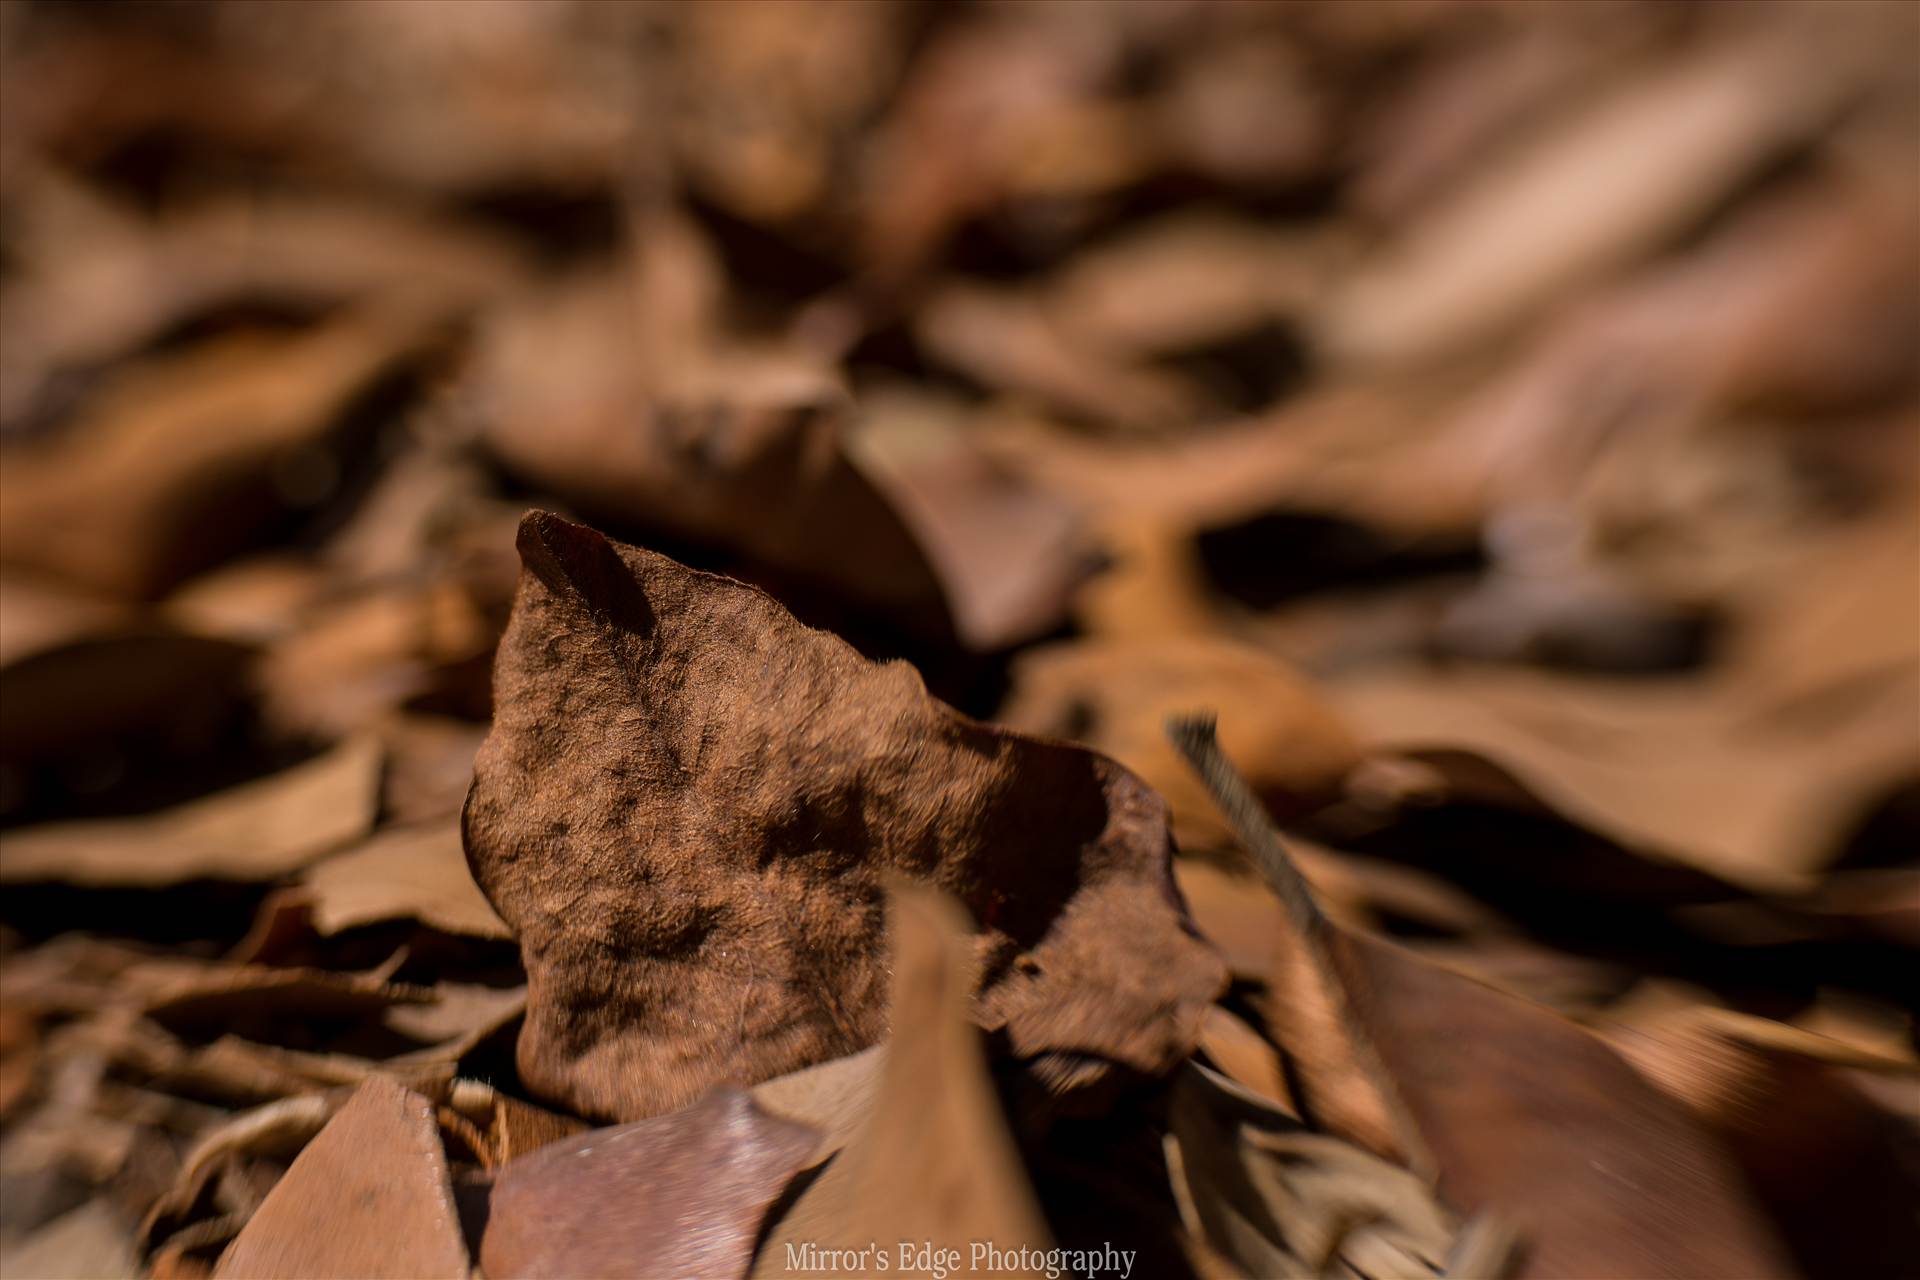 Chocolate Leaves Fallen.jpg undefined by Sarah Williams